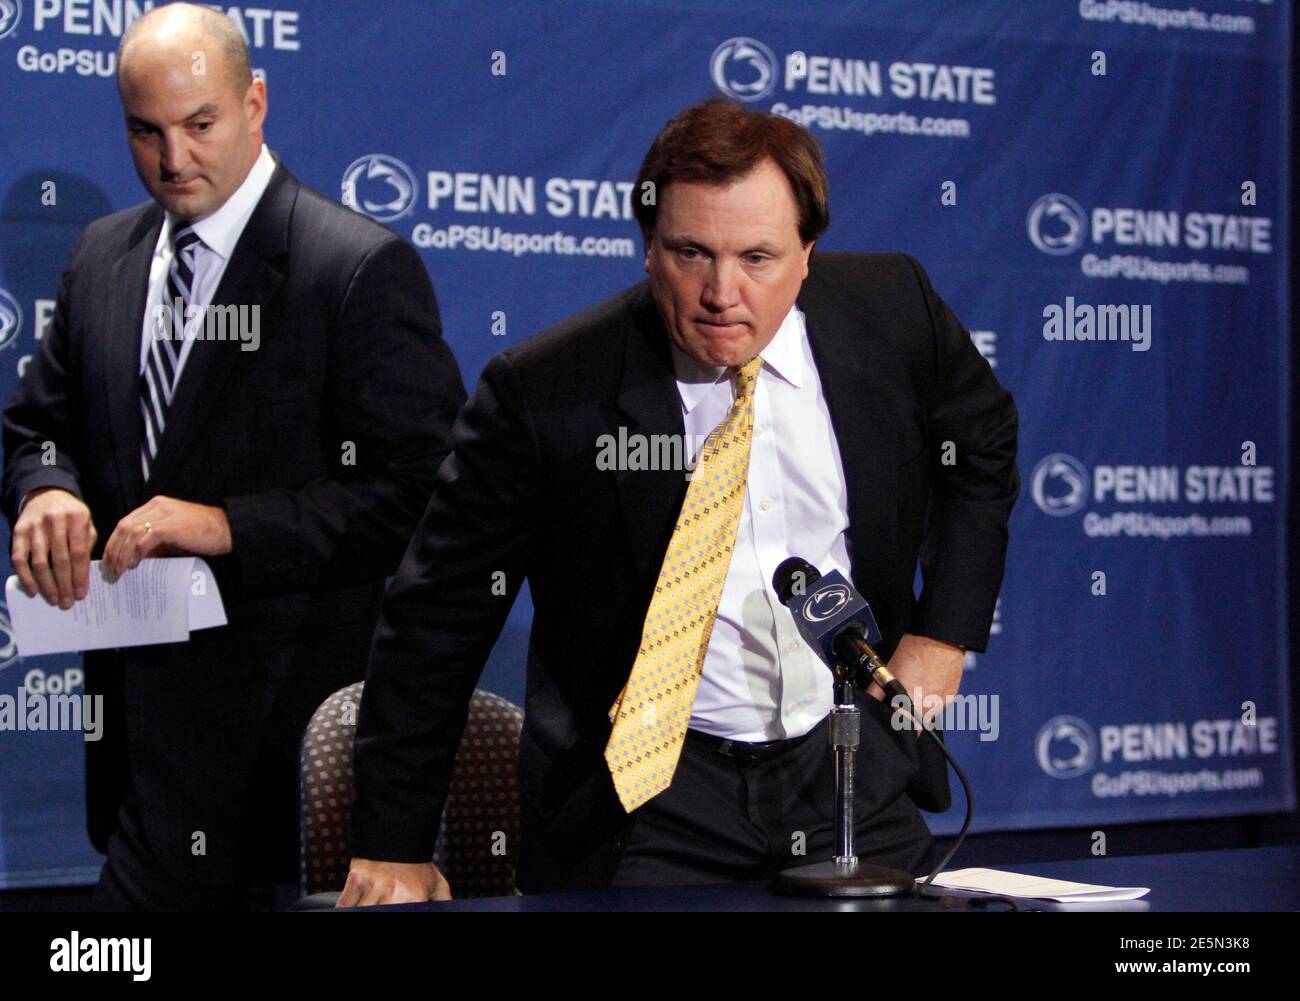 Acting Penn State Athletic Director Mark Sherburne (L) stands near interim football coach Tom Bradley during a news conference at Beaver stadium in State College, Pennsylvania November 10, 2011. Bradley will replace coach Joe Paterno who was fired amid a scandal over allegations about long-time assistant coach, Jerry Sandusky, who was charged with sexually abusing at least eight young boys over a decade. REUTERS/Tim Shaffer (UNITED STATES - Tags: SPORT FOOTBALL EDUCATION CRIME LAW) Stock Photo